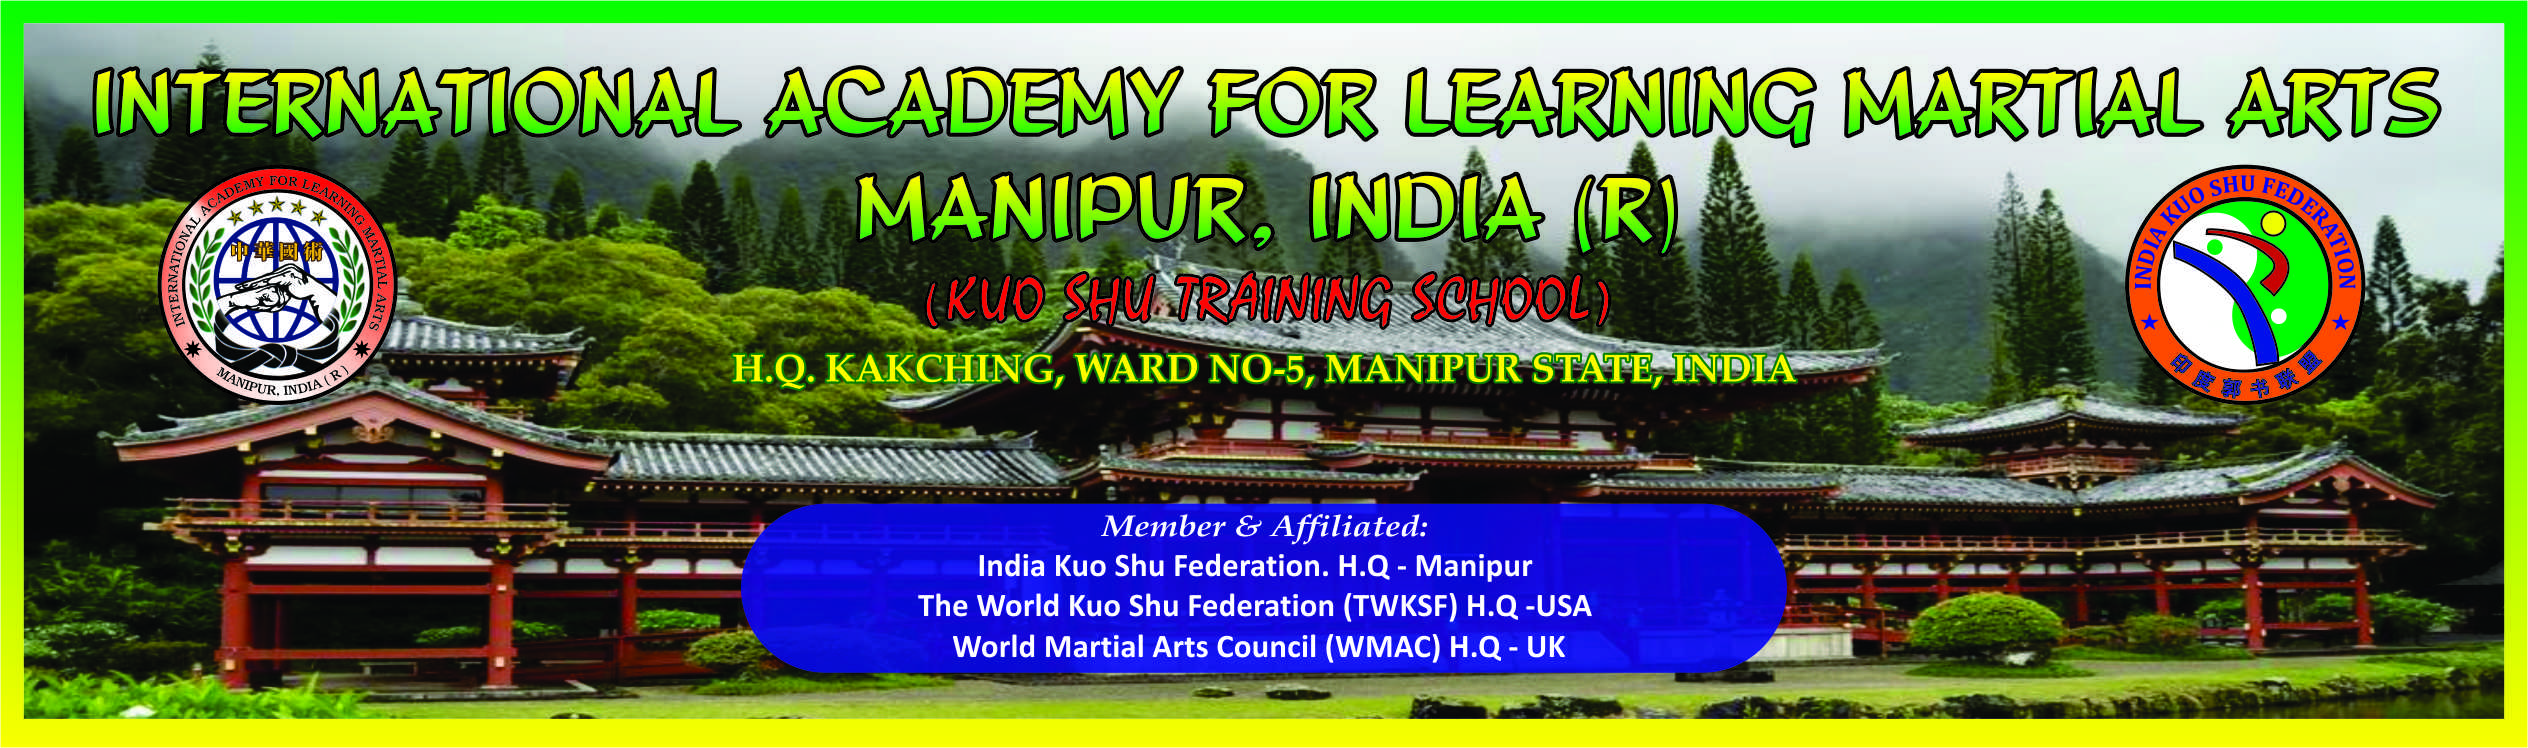 International Academy For Learning Martial Arts,Manipur,India